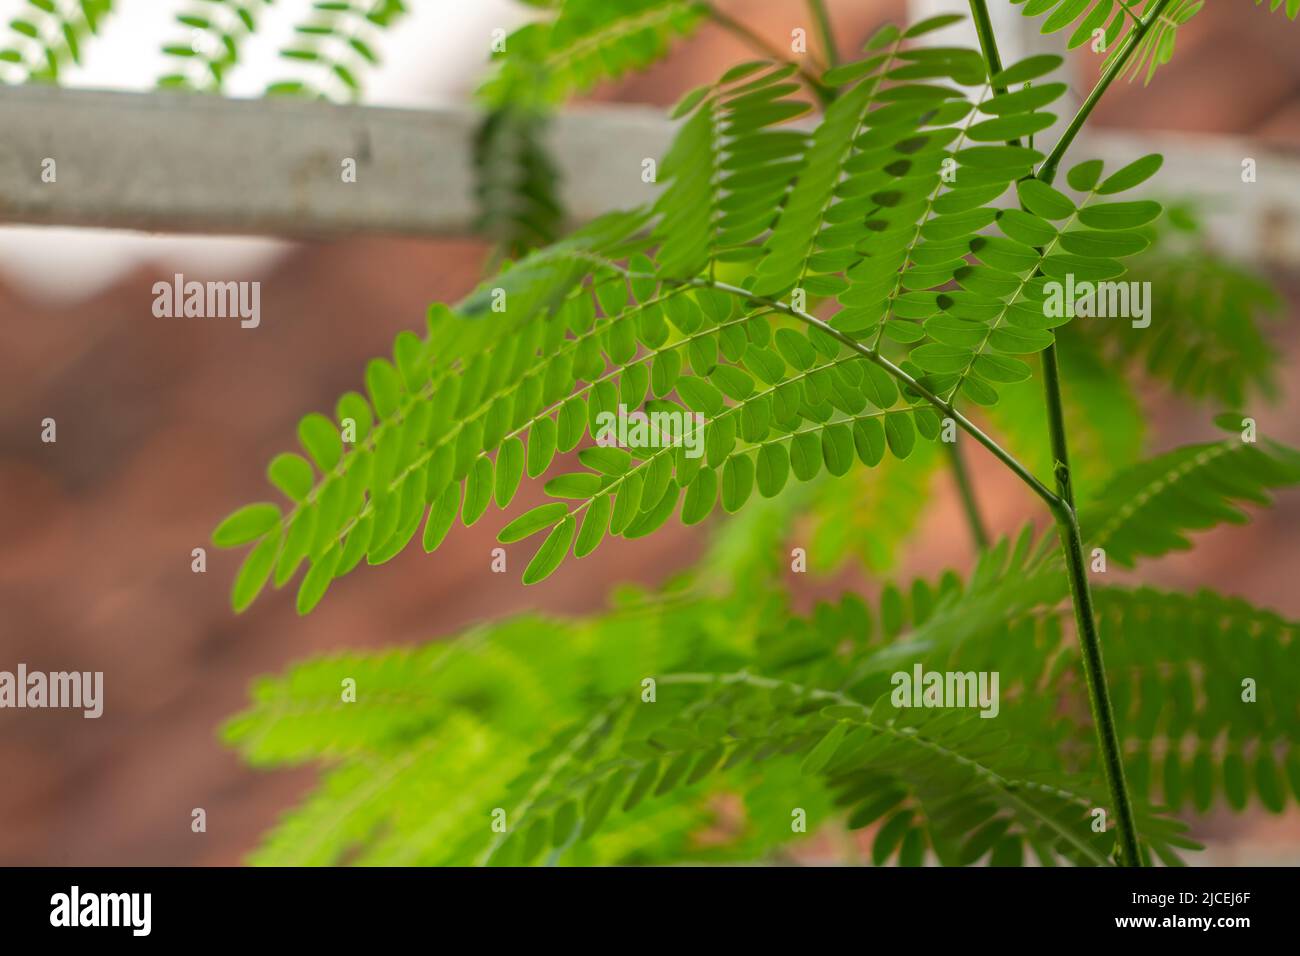 River tamarind plant shoots are green, small leaves are fresh green, plant growth Stock Photo